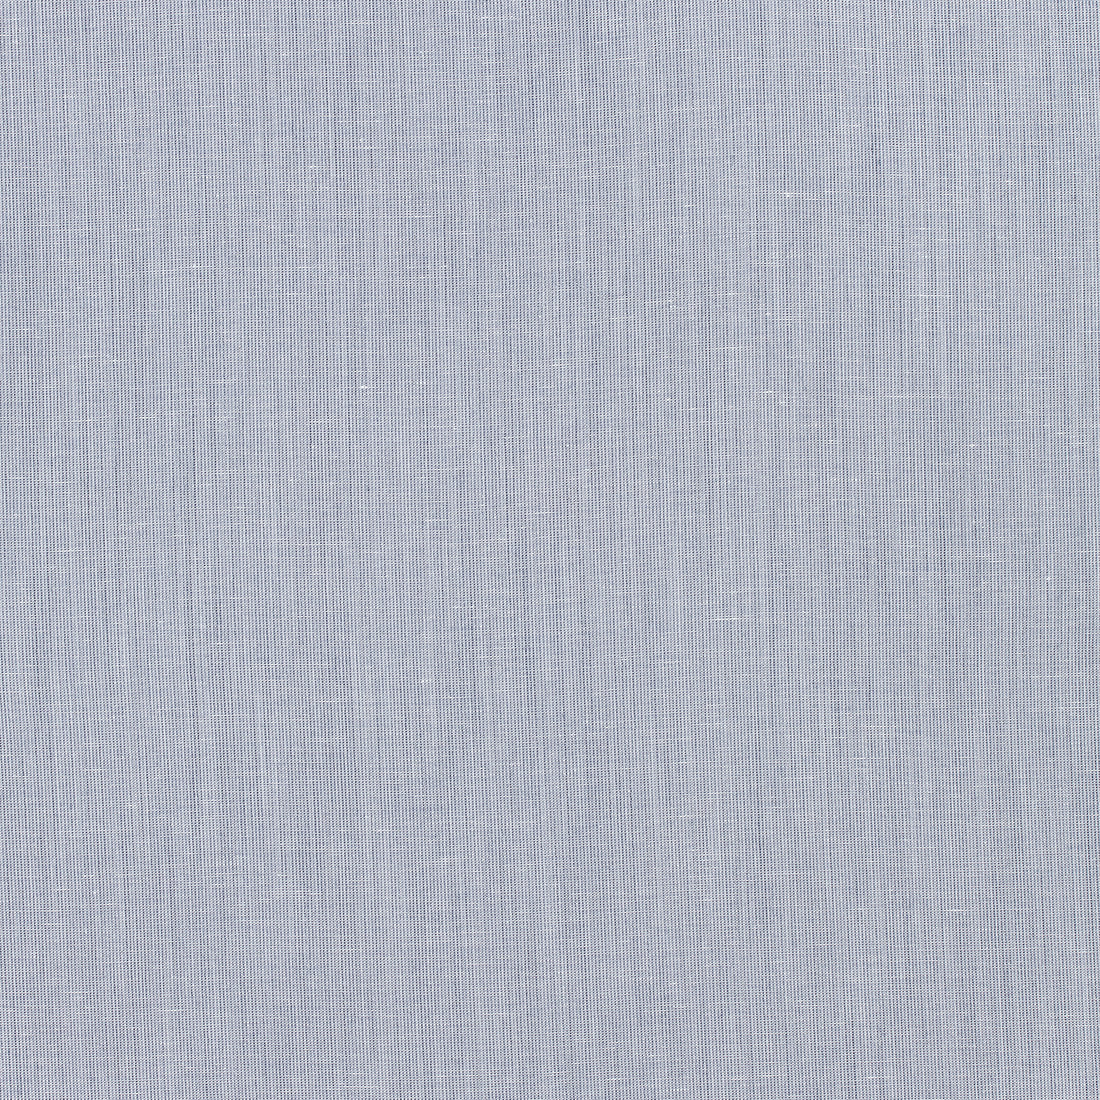 Berkshire fabric in denim color - pattern number FWW7121 - by Thibaut in the Atmosphere collection